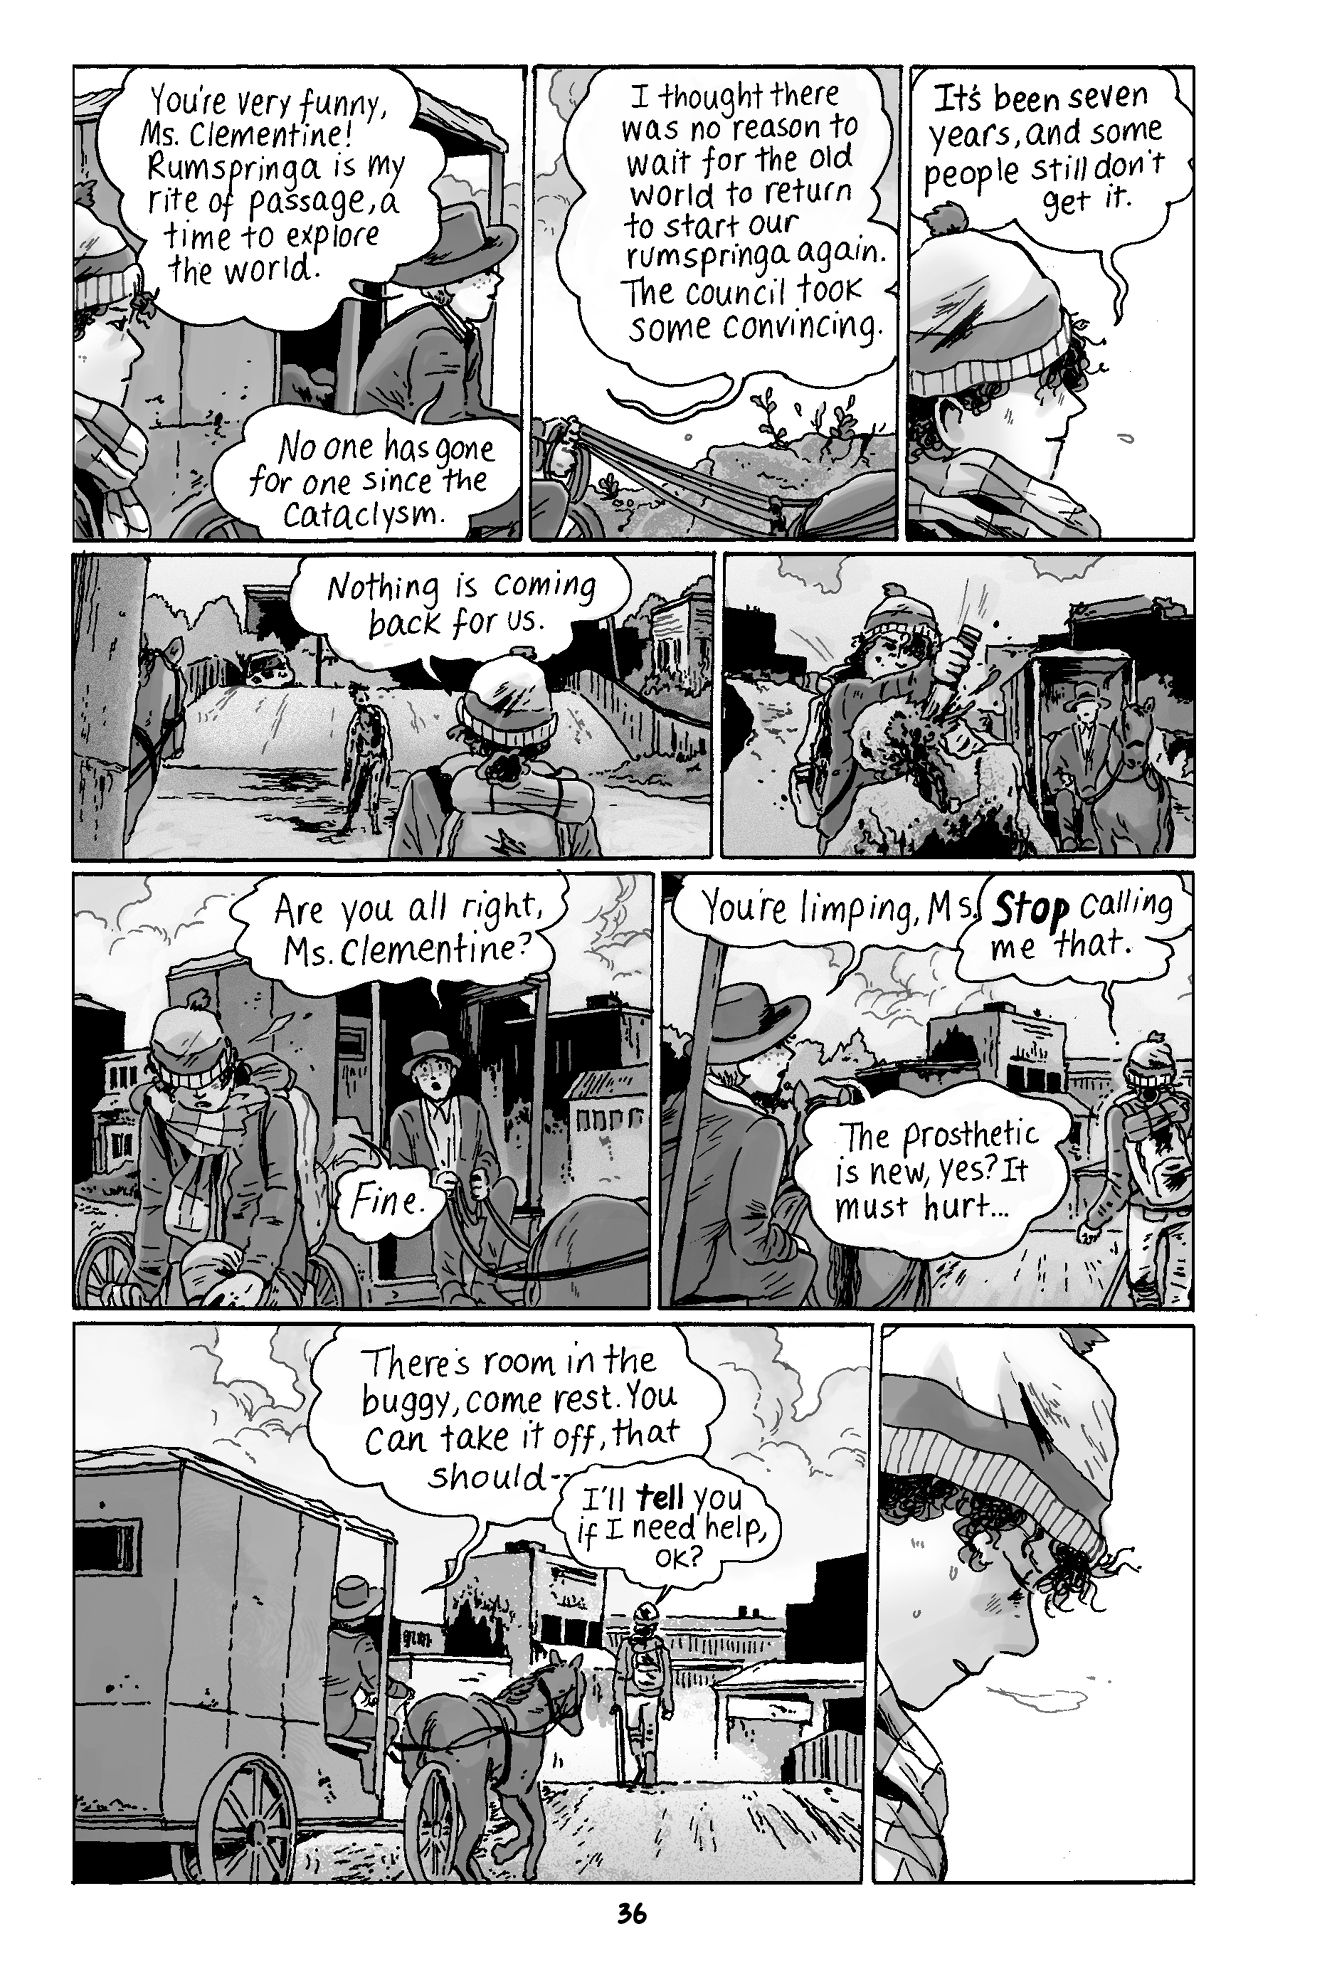 A page from The Walking Dead: Clementine: Book One, by Tillie Walden.